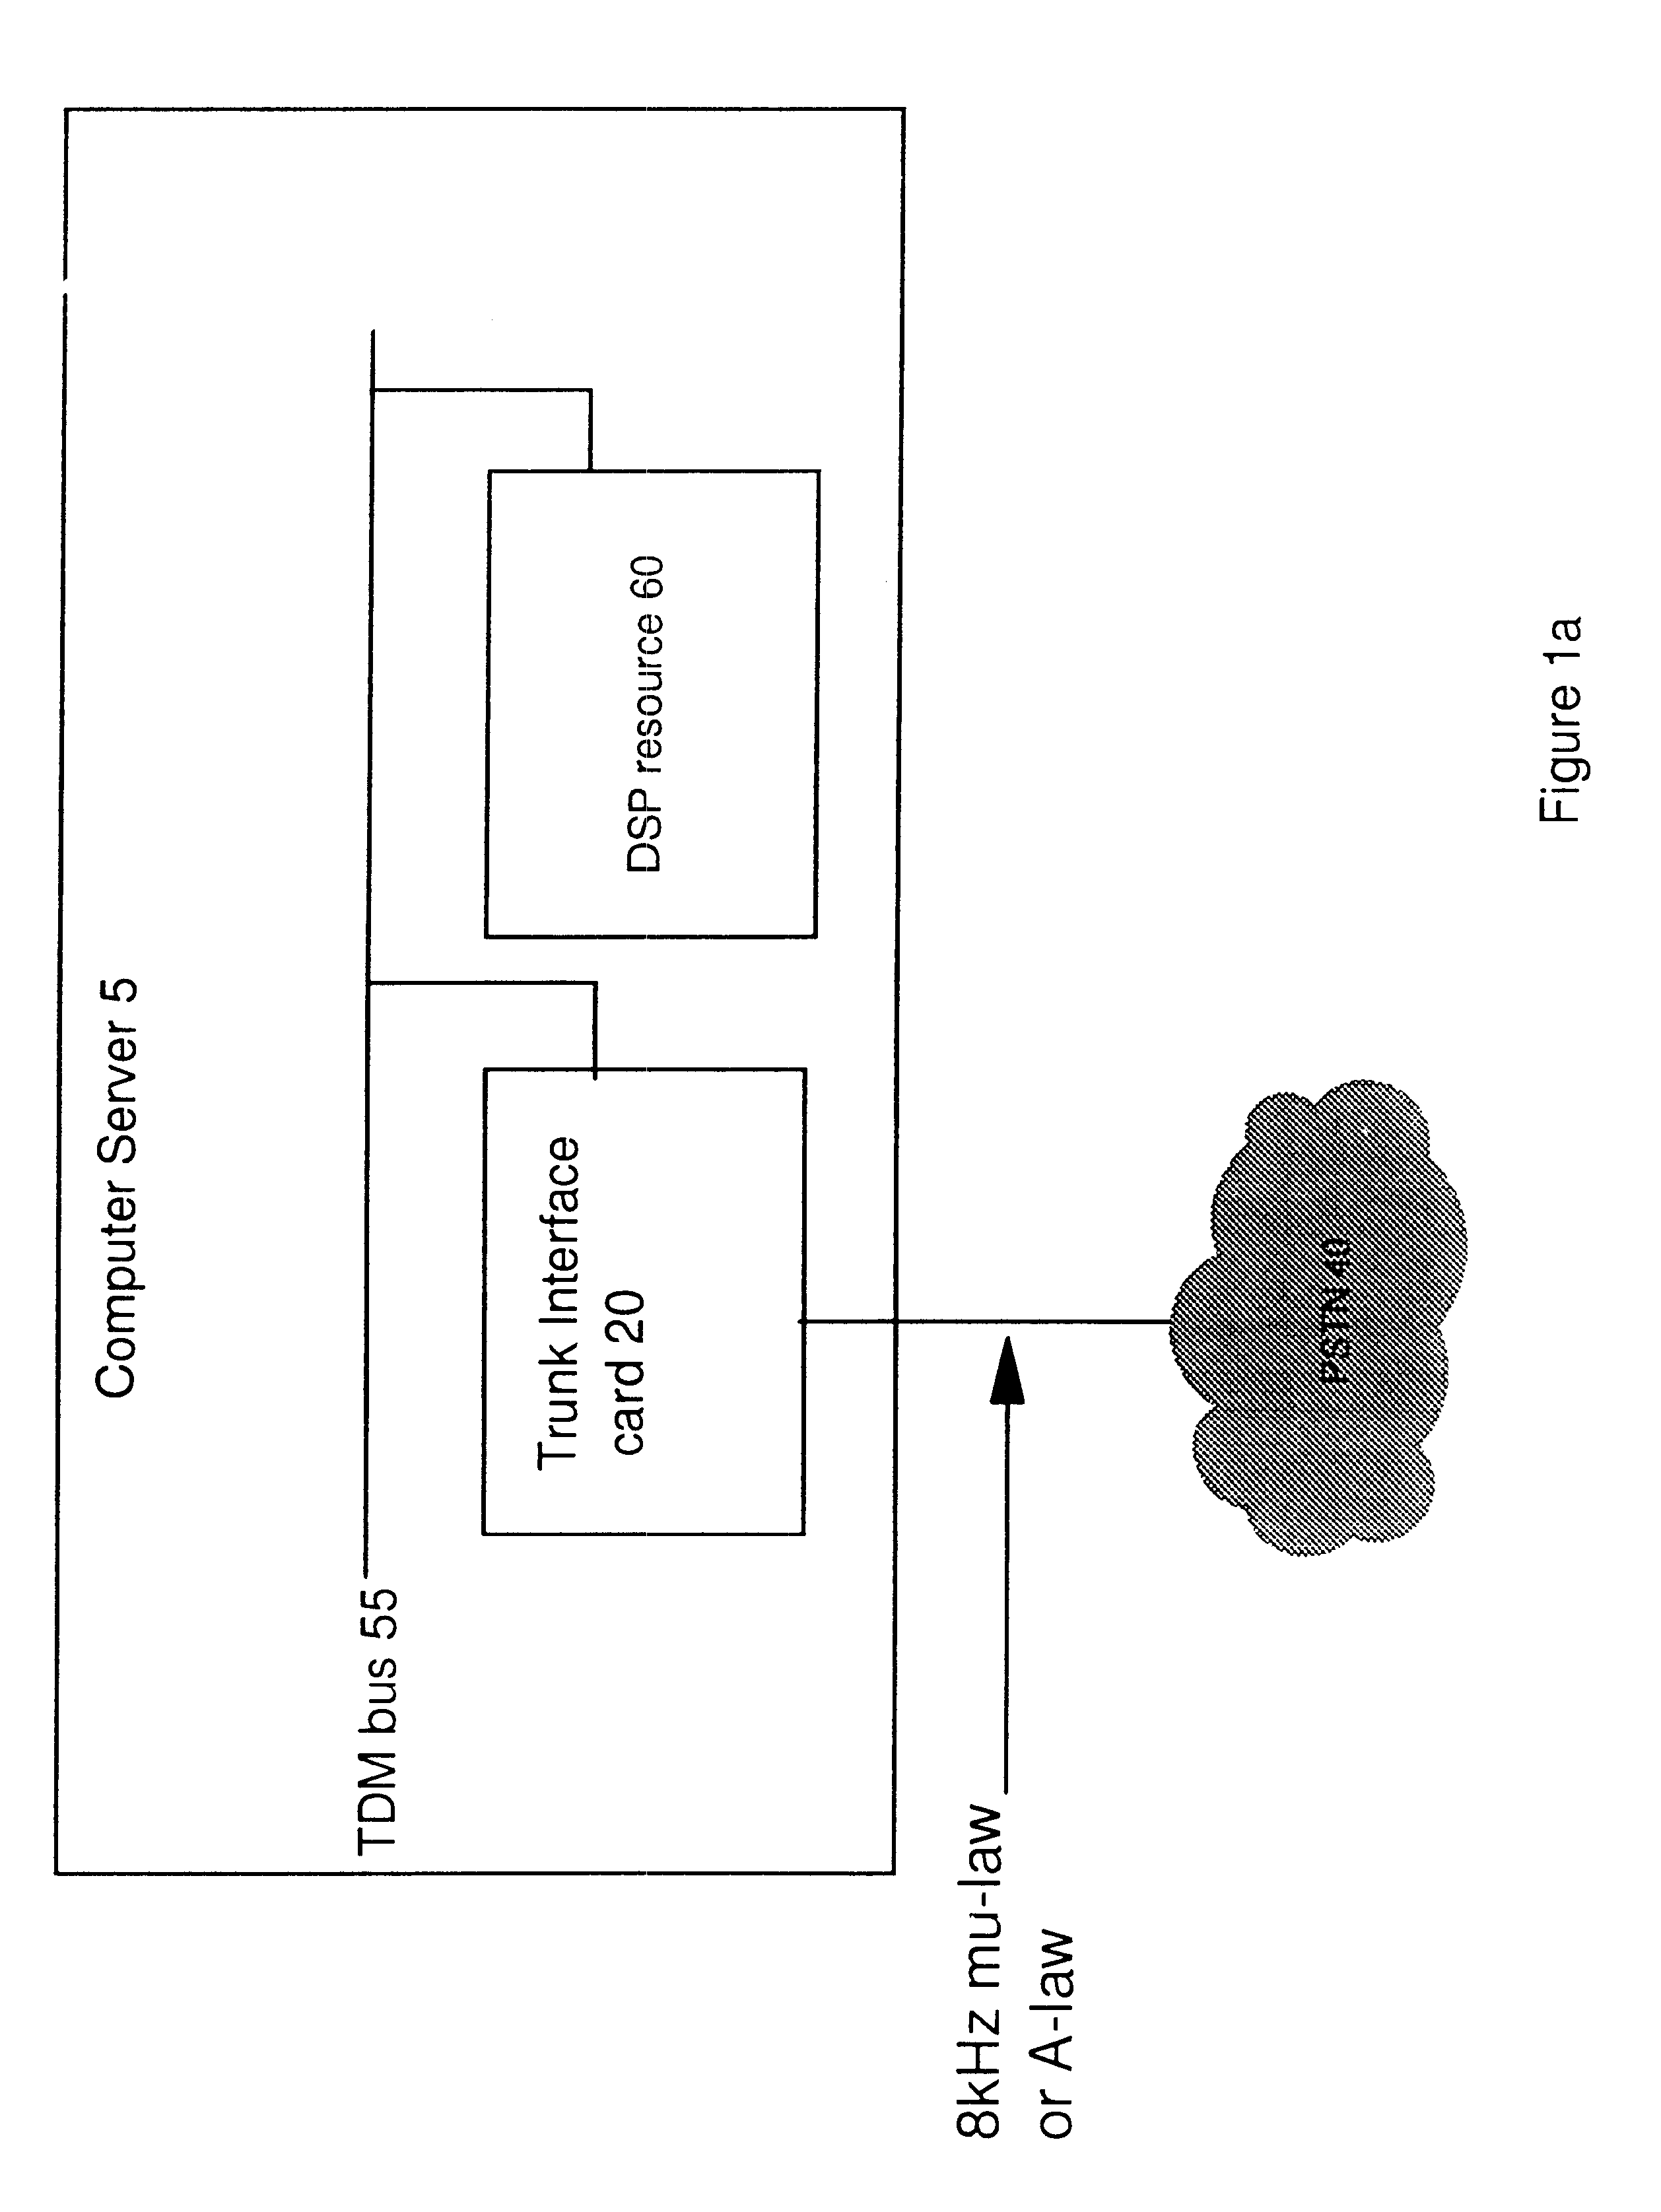 Voice processing system